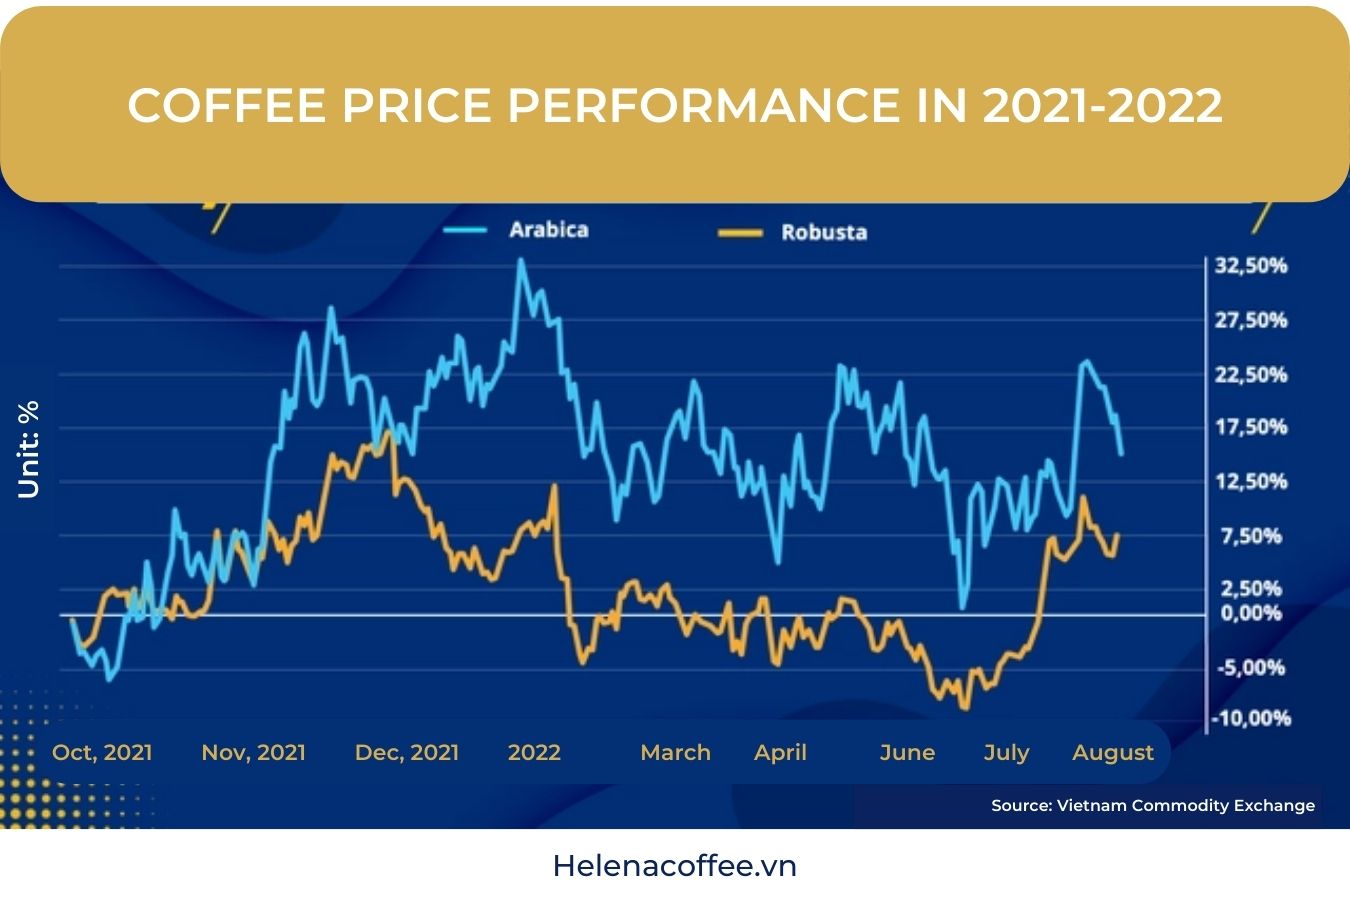 Why Do World Coffee Prices Remain High Despite Fears Of Economic Recession